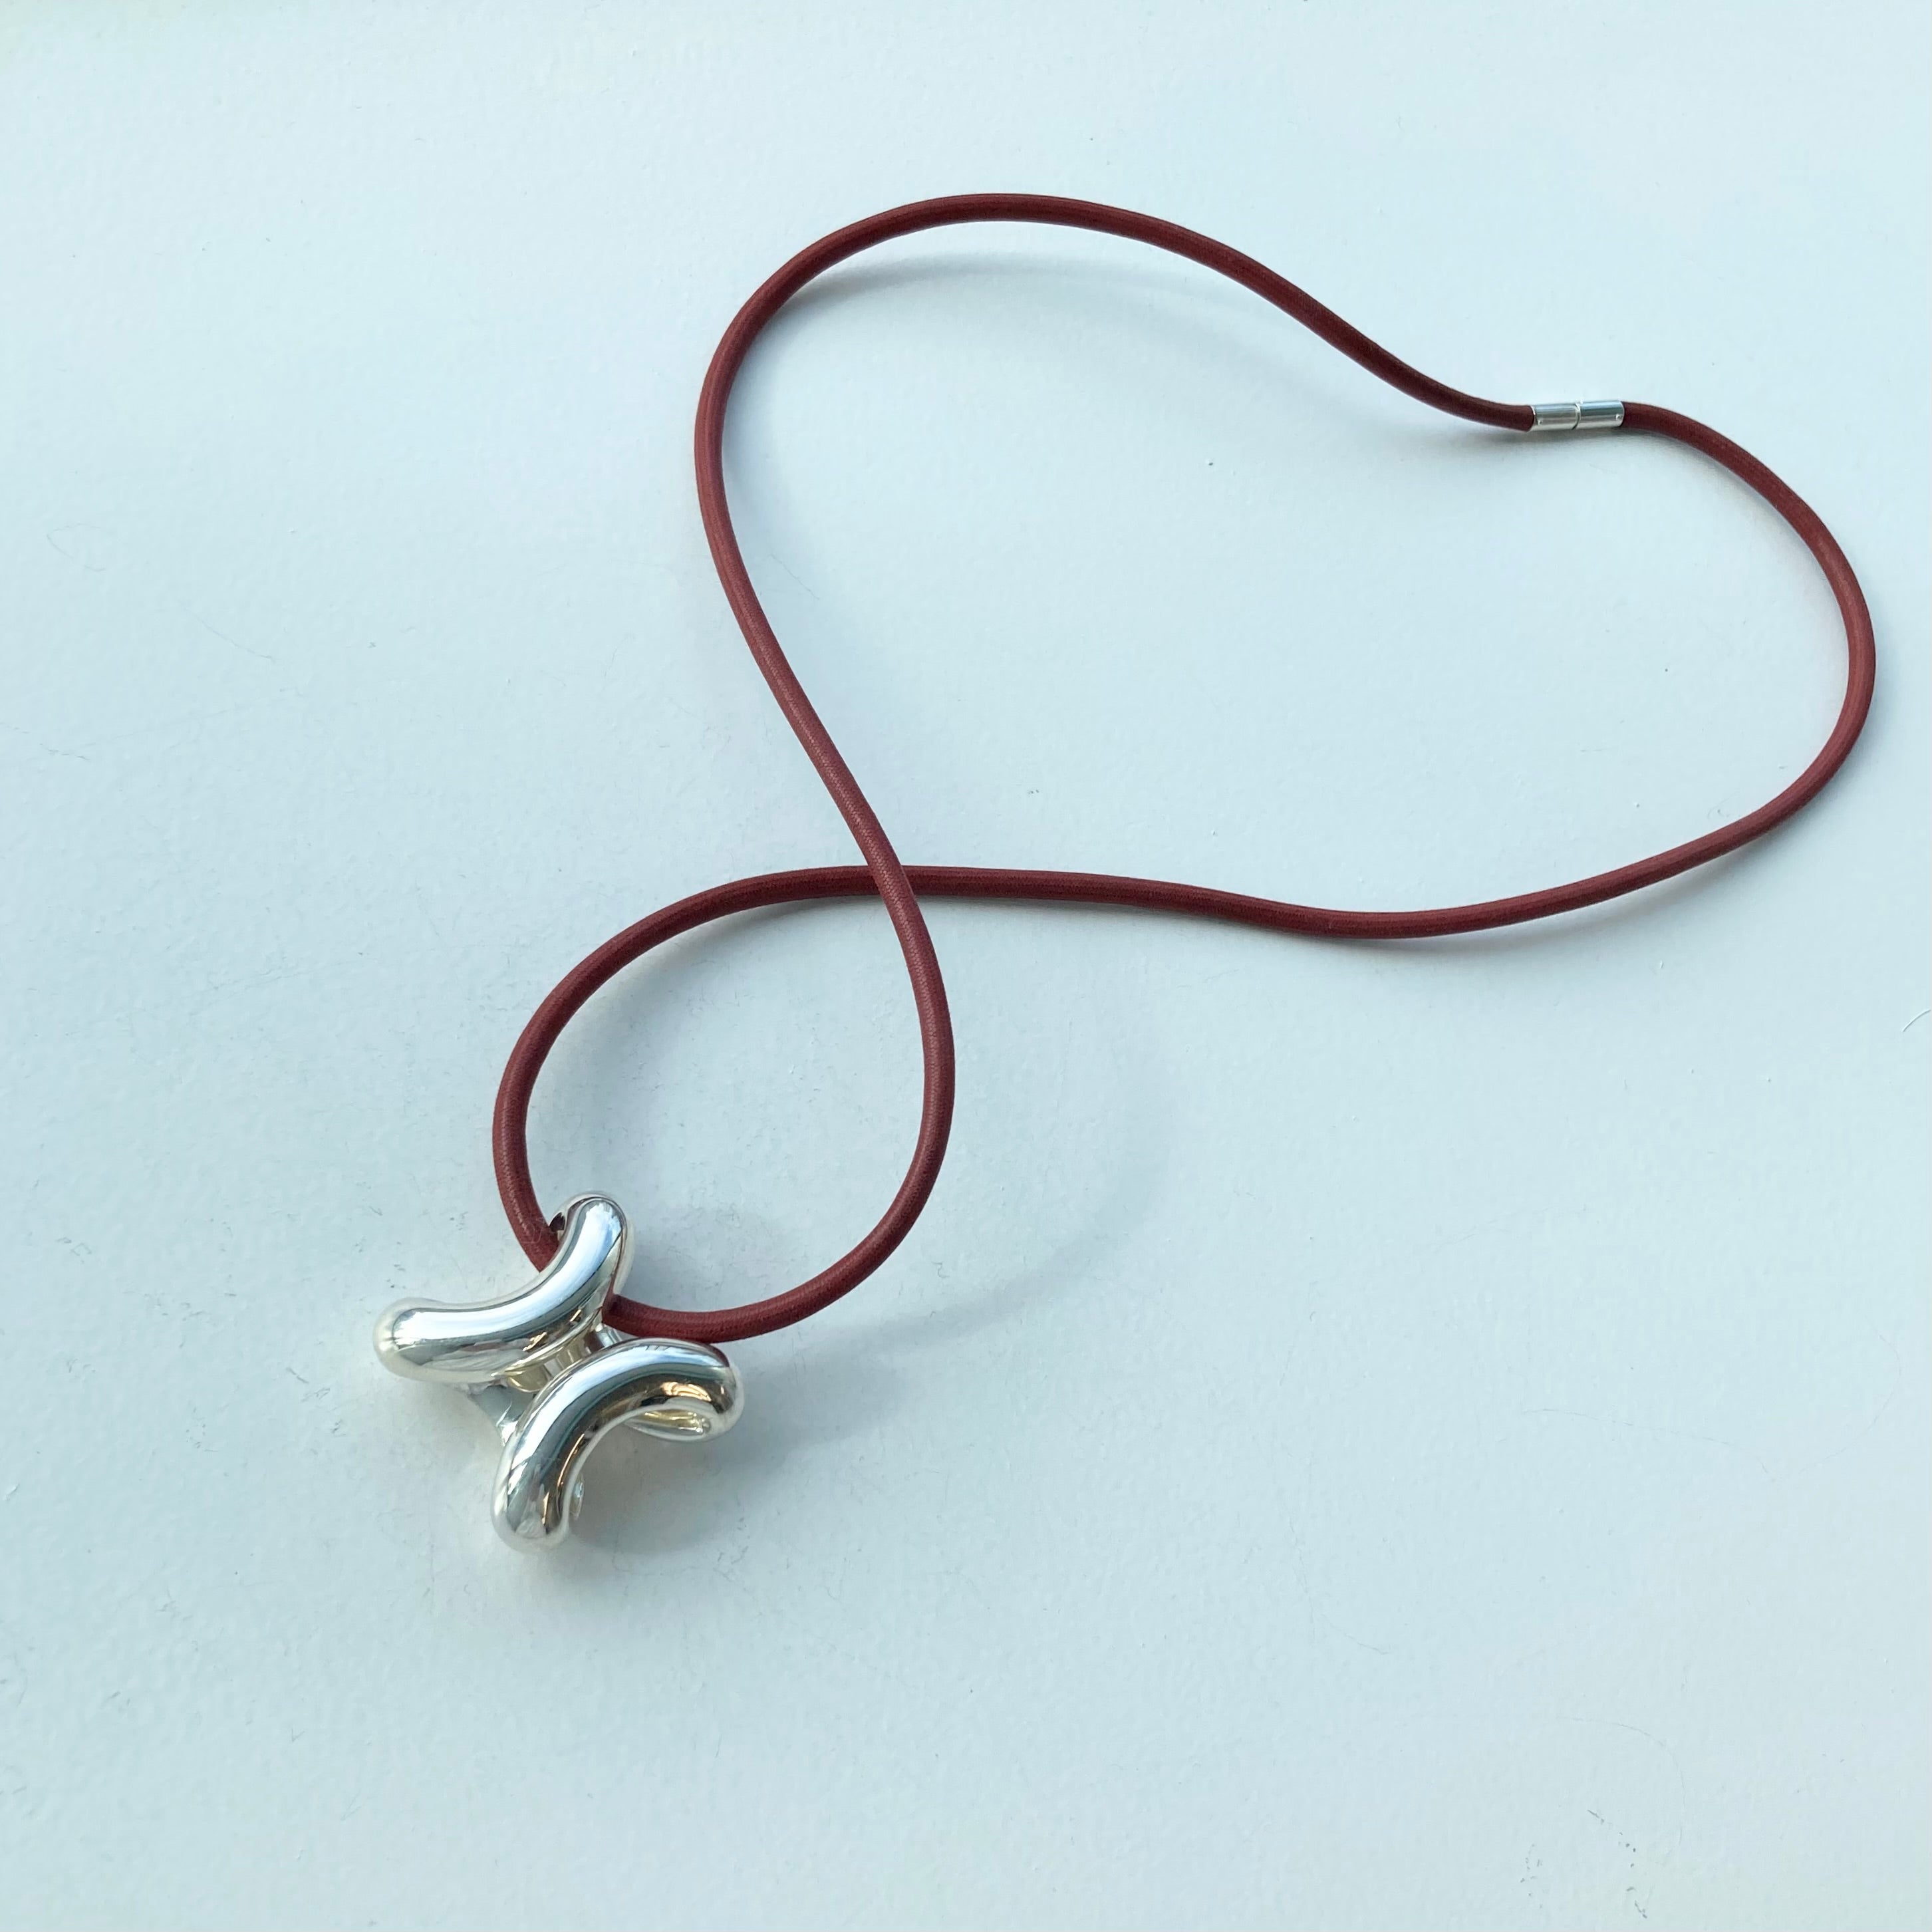 HERMES Lima necklace vintage SV925 エルメス リマ ネックレス 